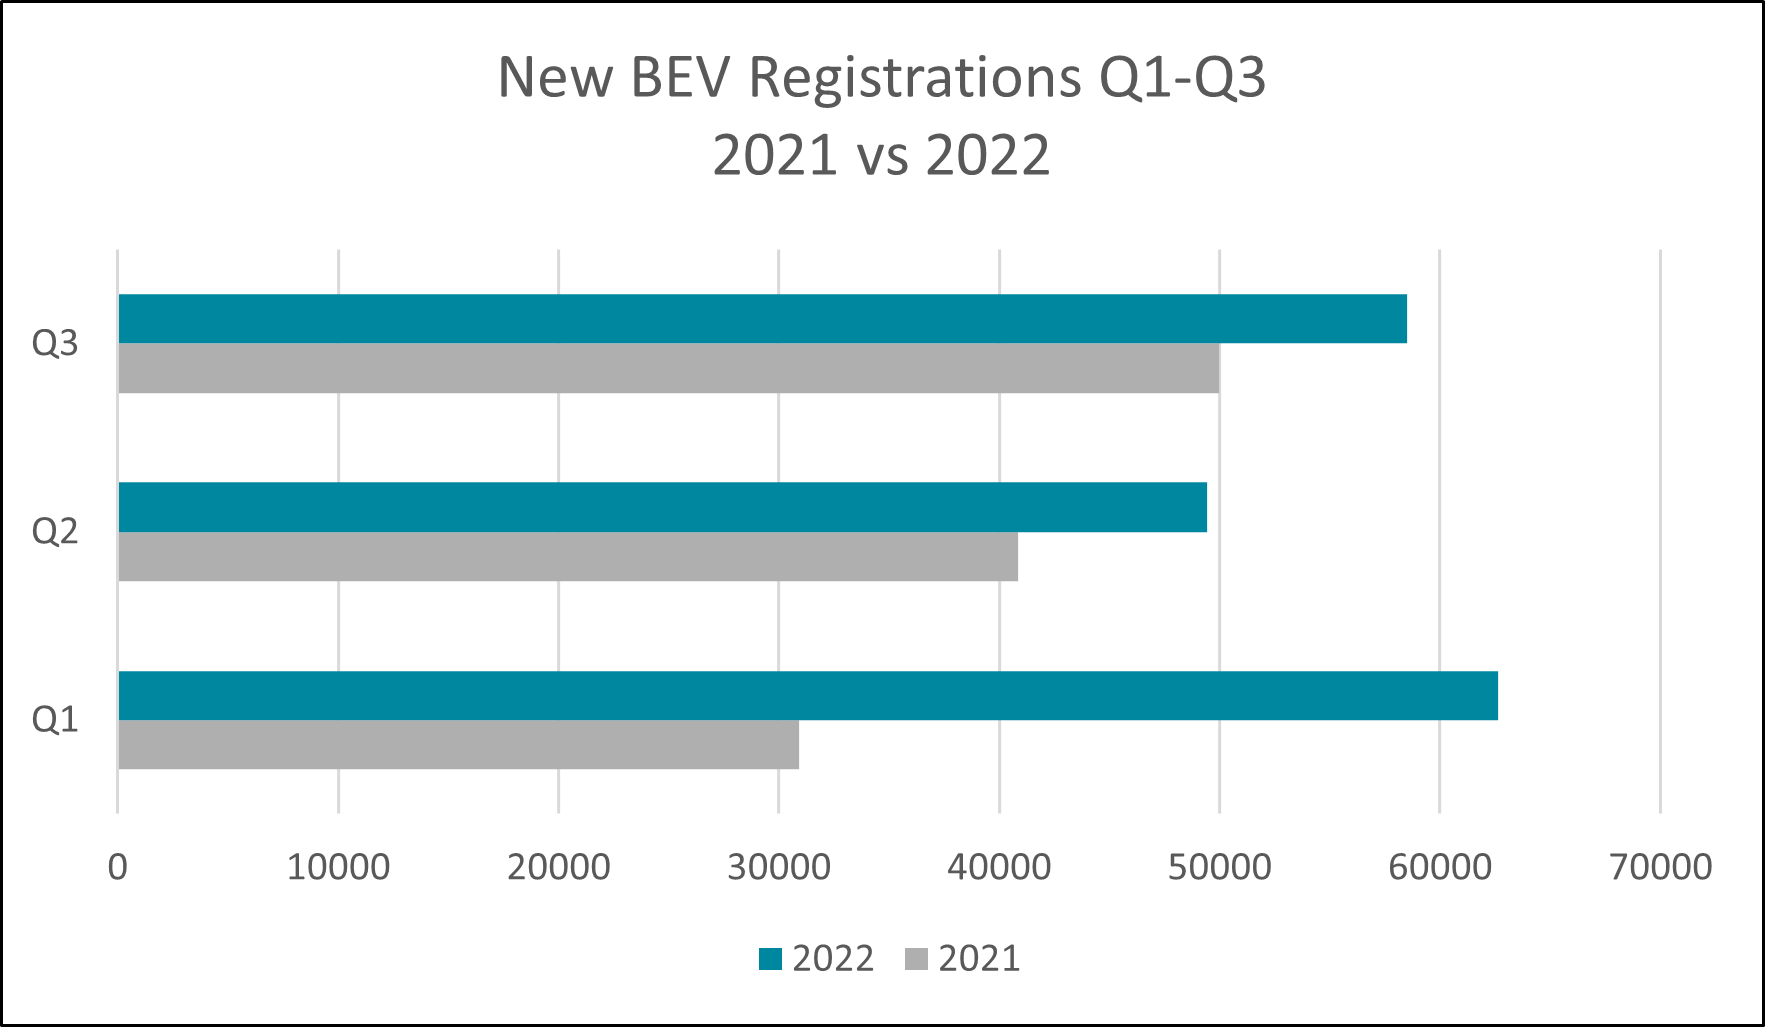 Electric Car registrations have increased in 2022 compared to last year